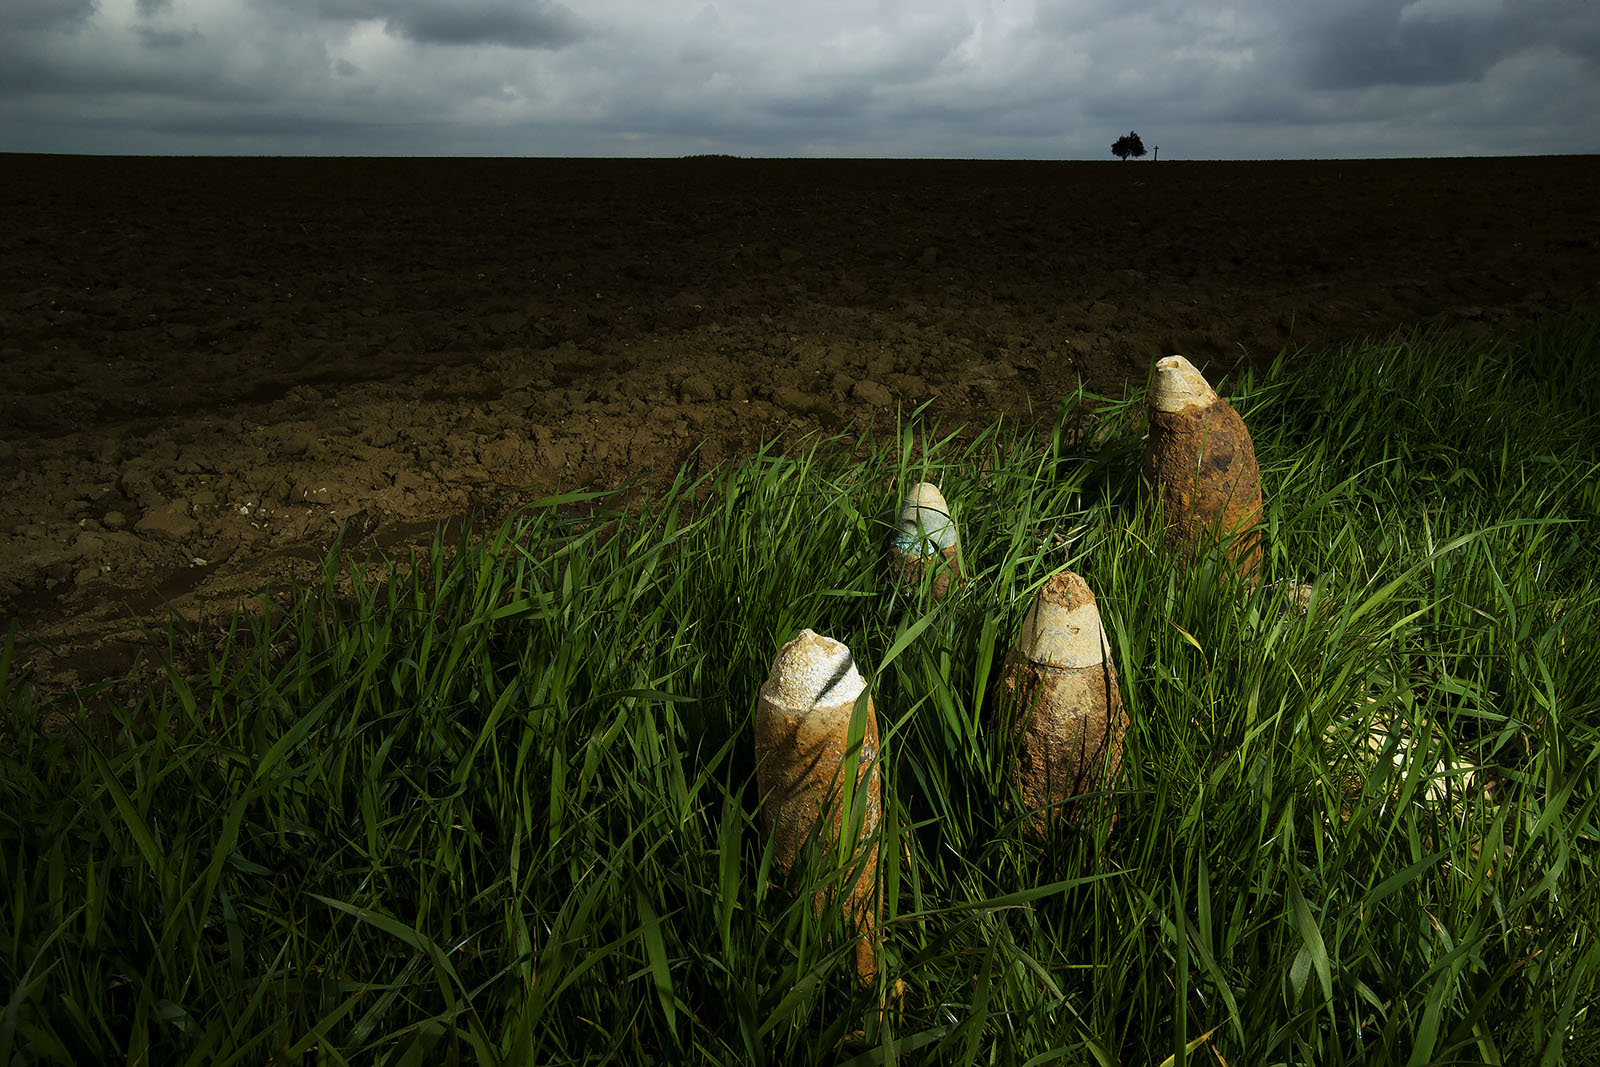 Modern photograph of the border between a field of grass and a field of dirt. WWI-era shells are lying in the grass.